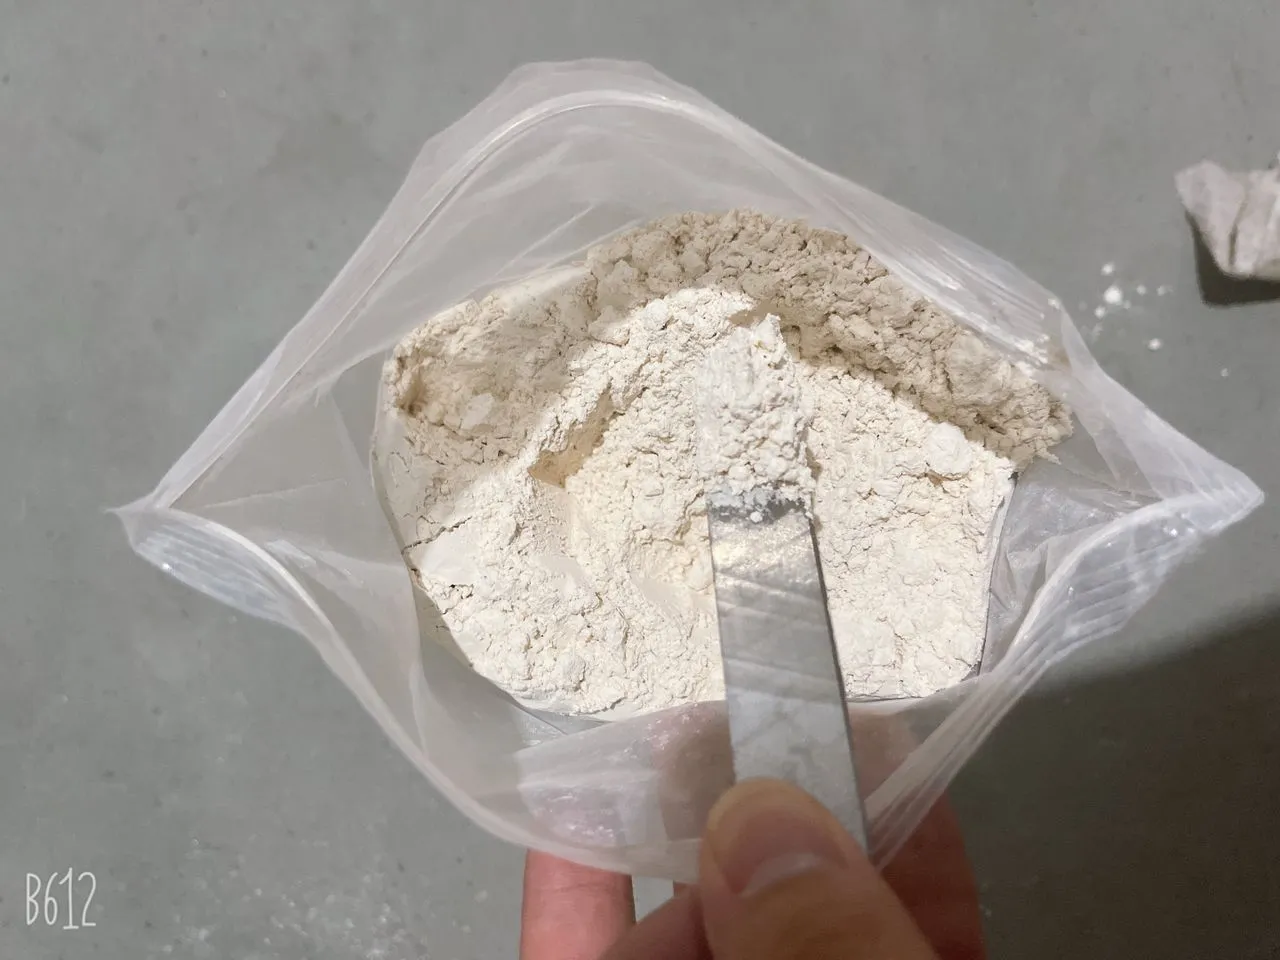 buy fluclotizolam, a-pvp for sale,2 fdck for sale,midazolam for sale,buy deschloroetizolam,flualprazolam for sale usa,alprazolam powder for sale,mdma crystals for sale,bromazolam powder supplier,alprazolam powder suppliers